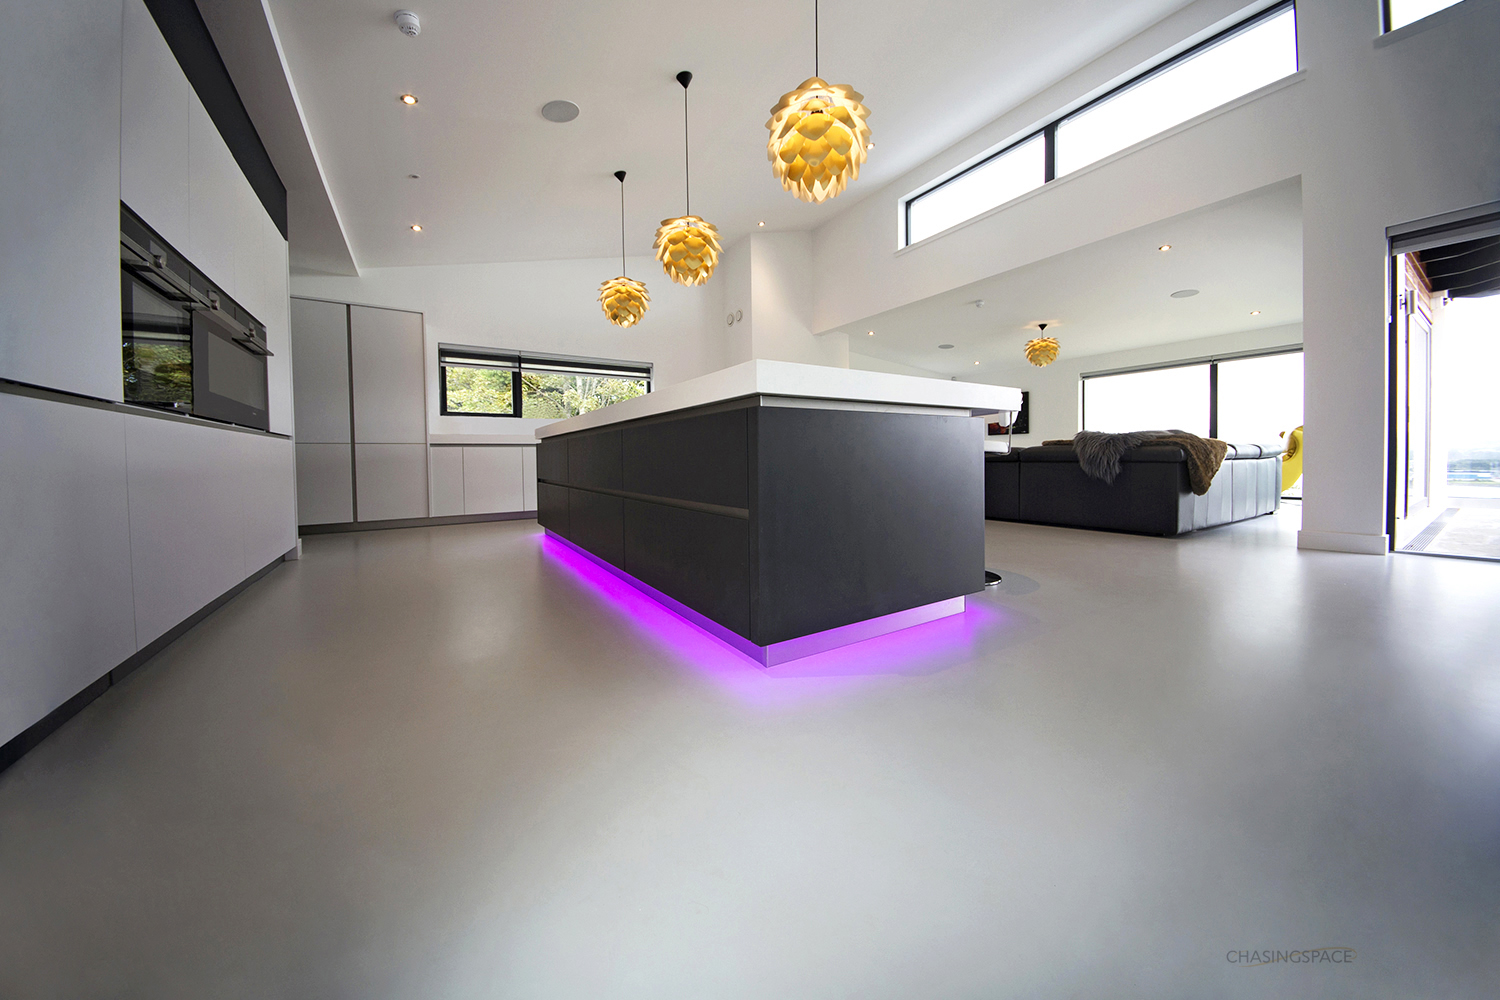 Chasingspace Resin Floors Polished Concrete Walls